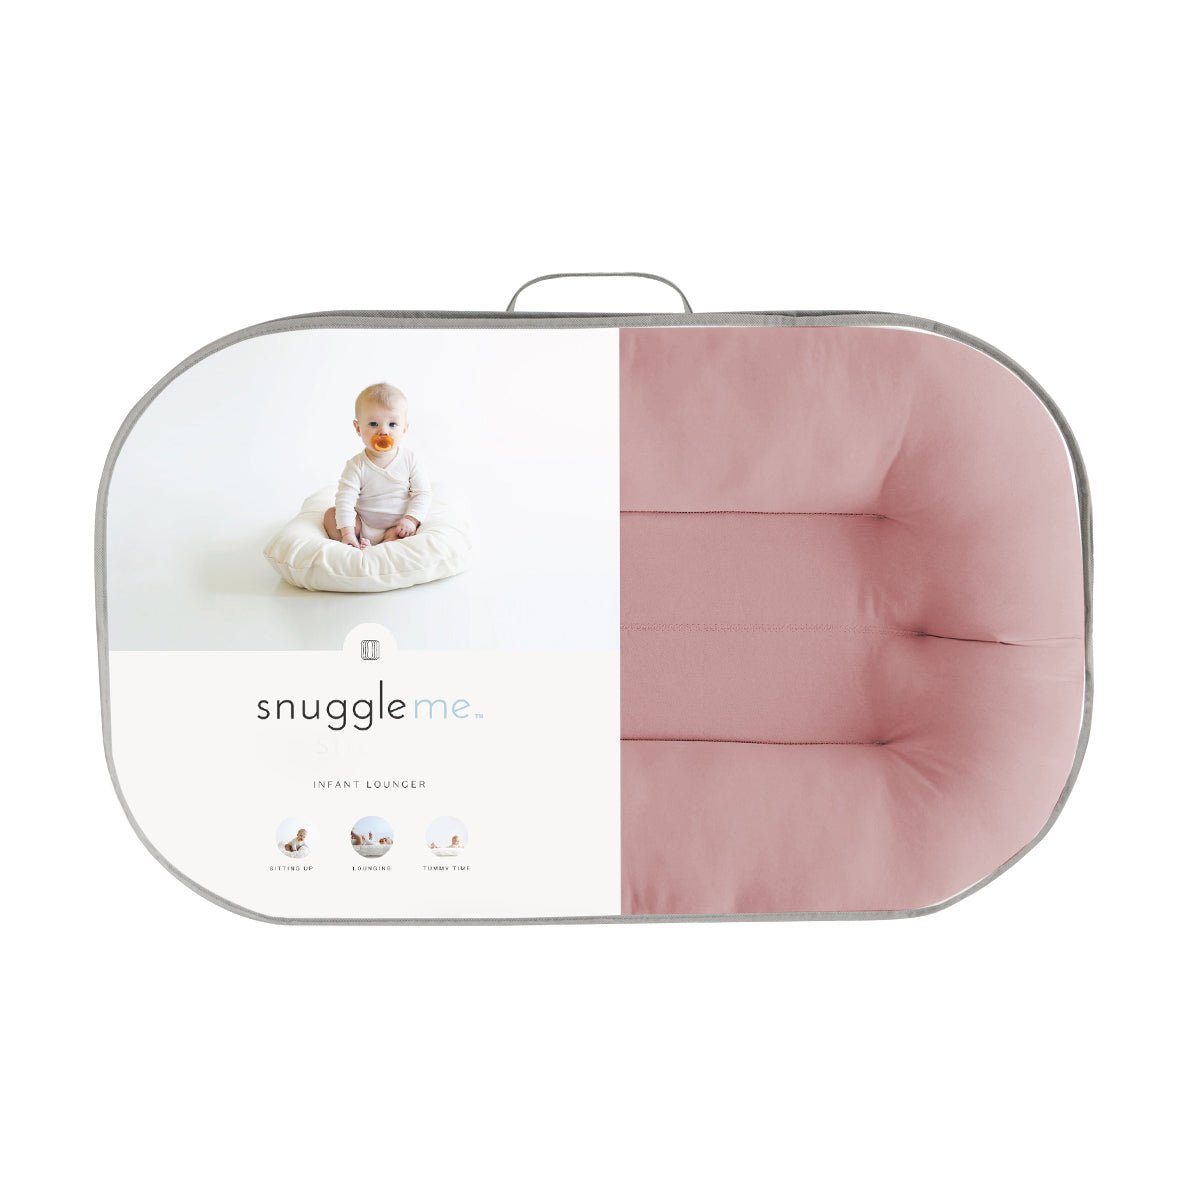 Snuggle me perfect lounger –